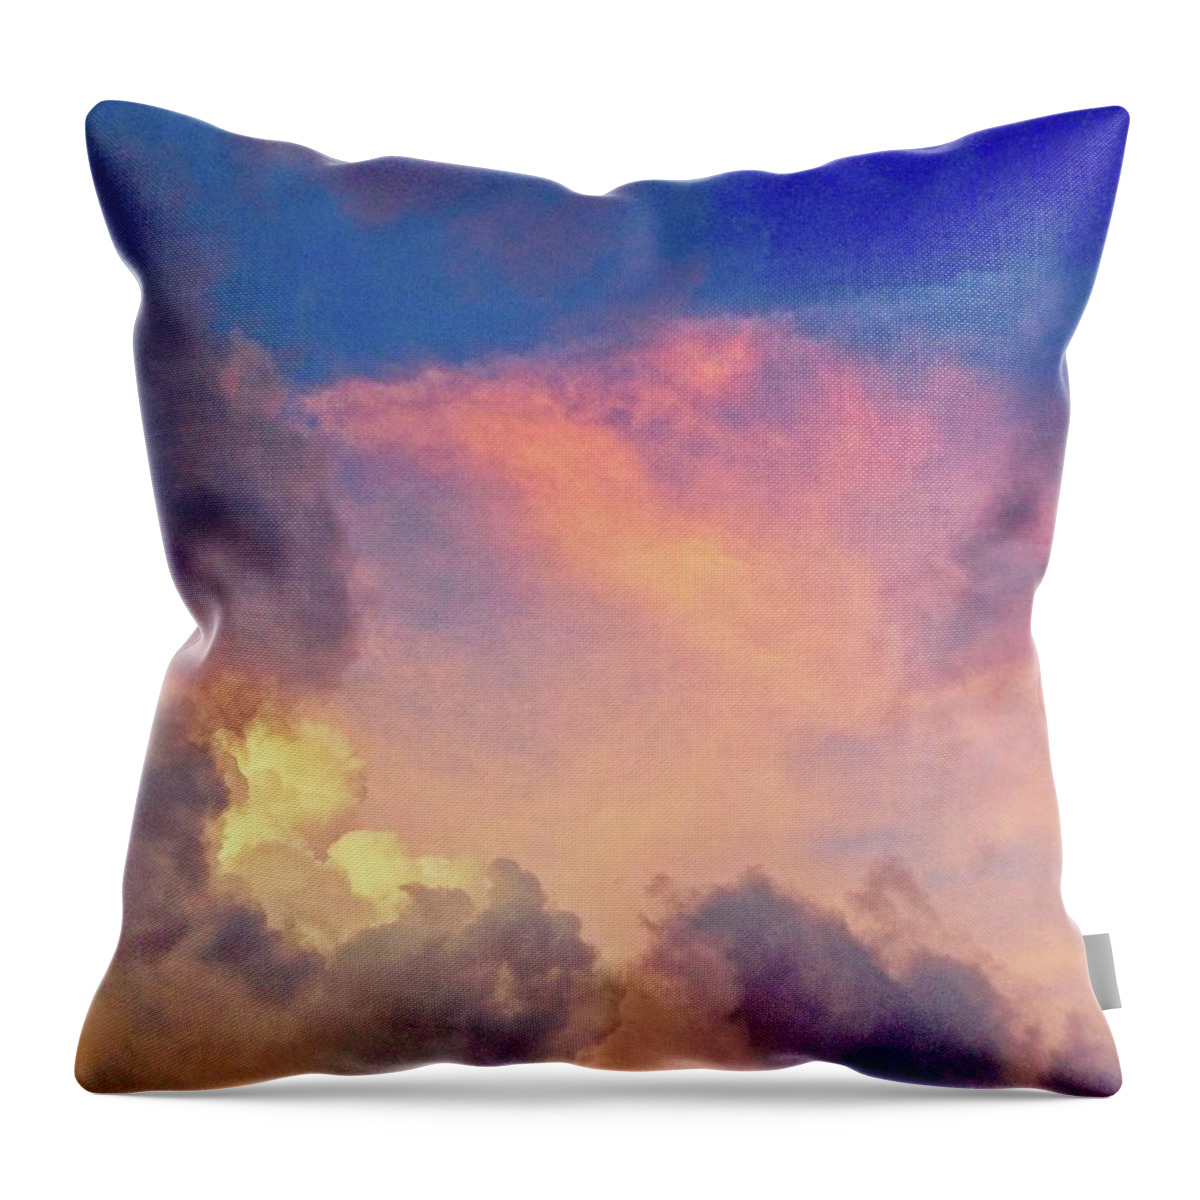 Pink Throw Pillow featuring the photograph Majestic Sky by Carol Whaley Addassi